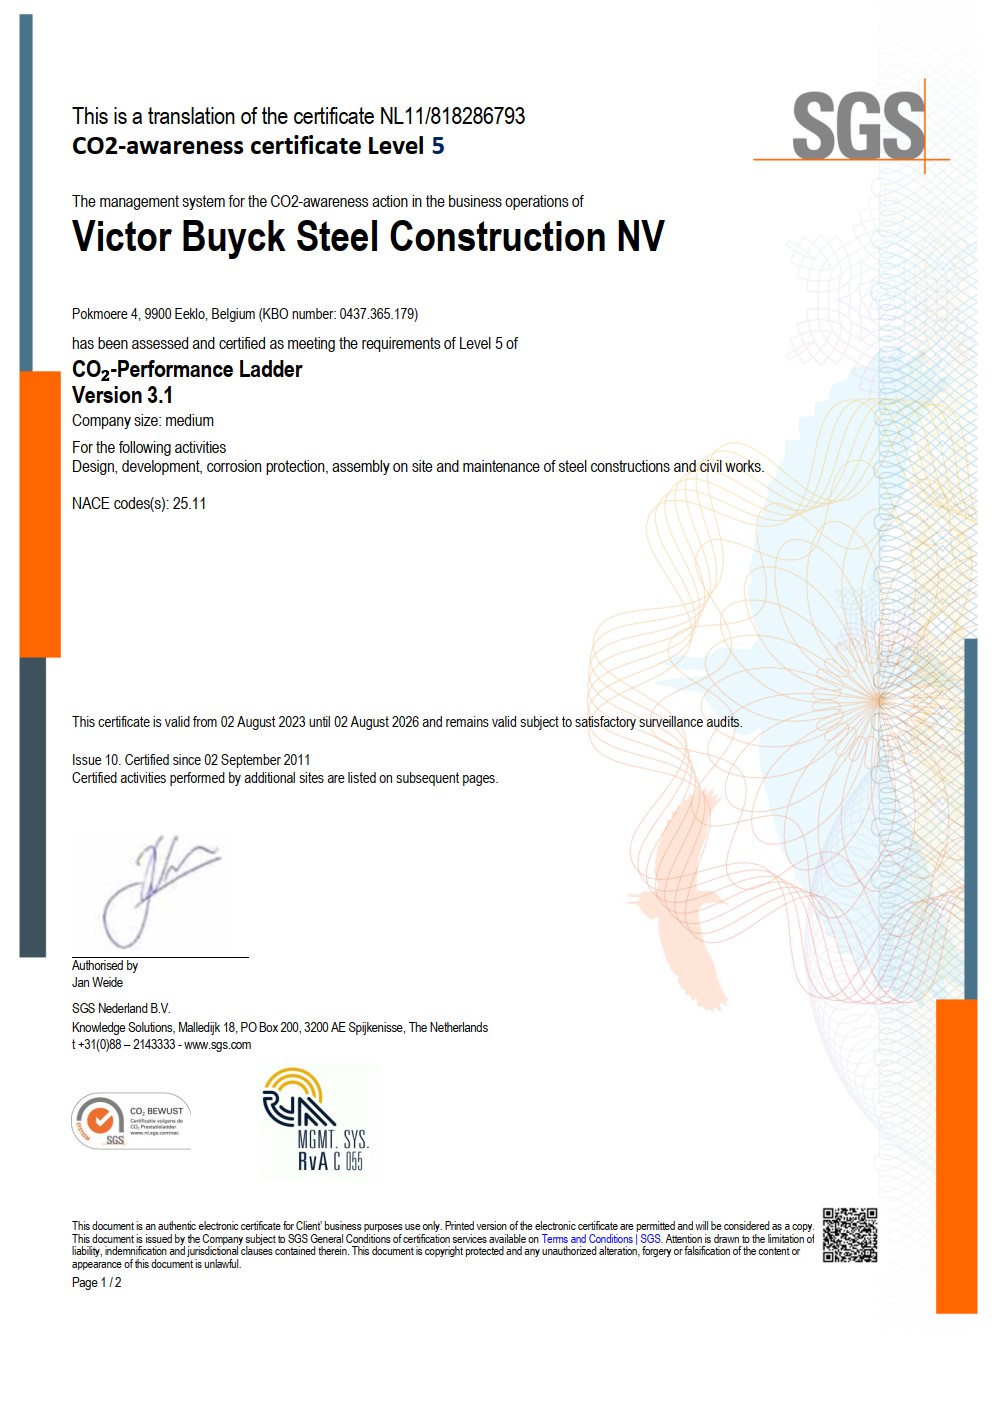 Victor Buyck Steel Construction - CO2 performance ladder level 5 certificate (ENG).jpg